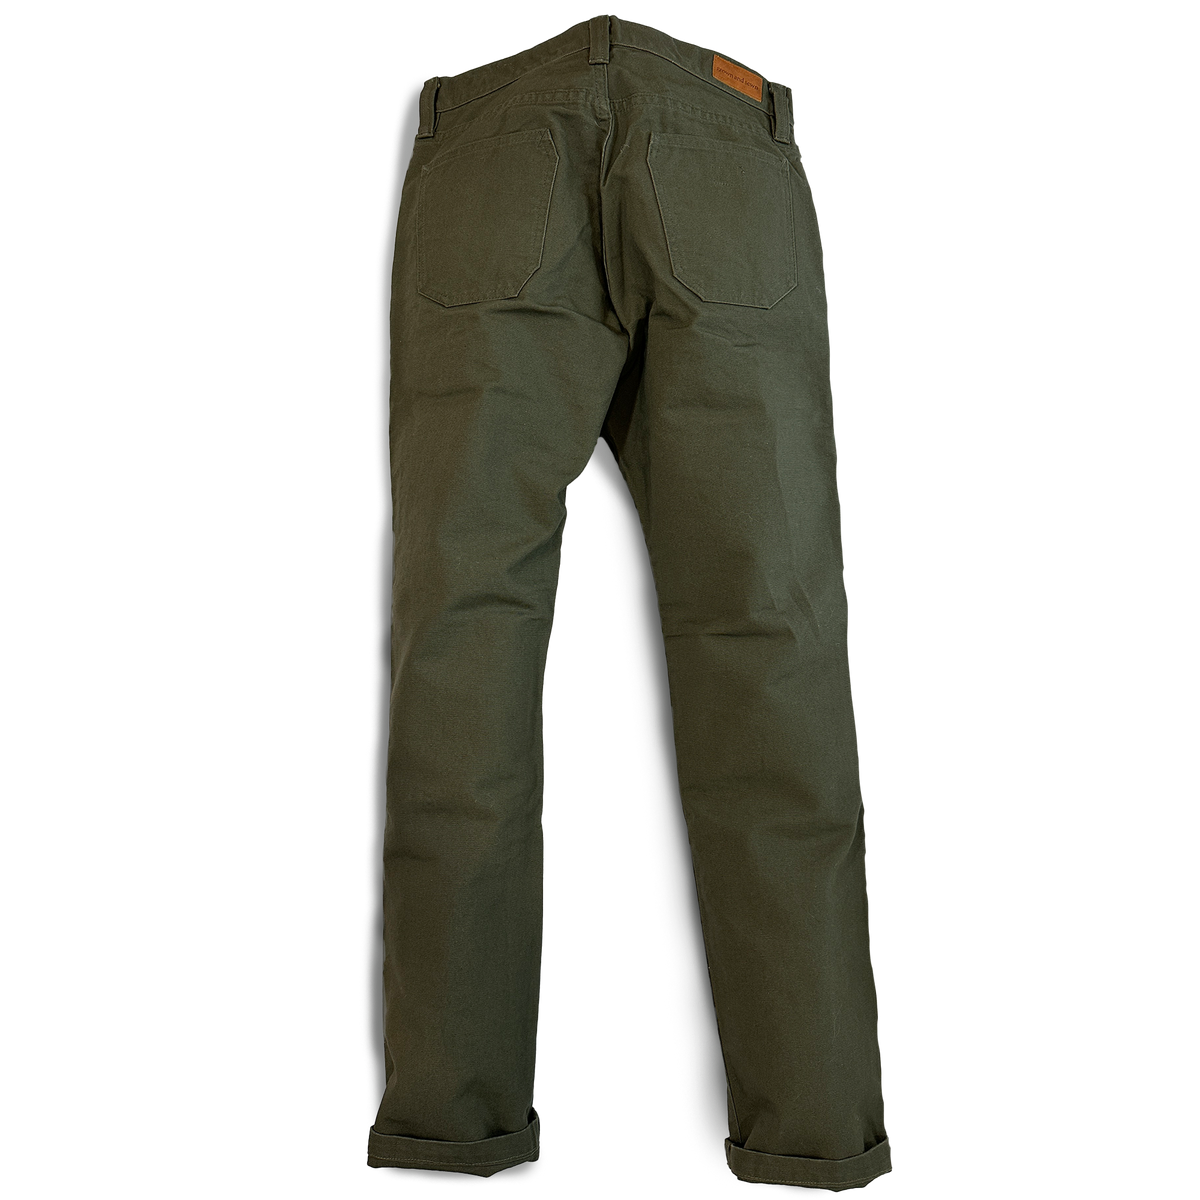 Foundation Essential Canvas Pant - Brushed Natural - grown&sewn